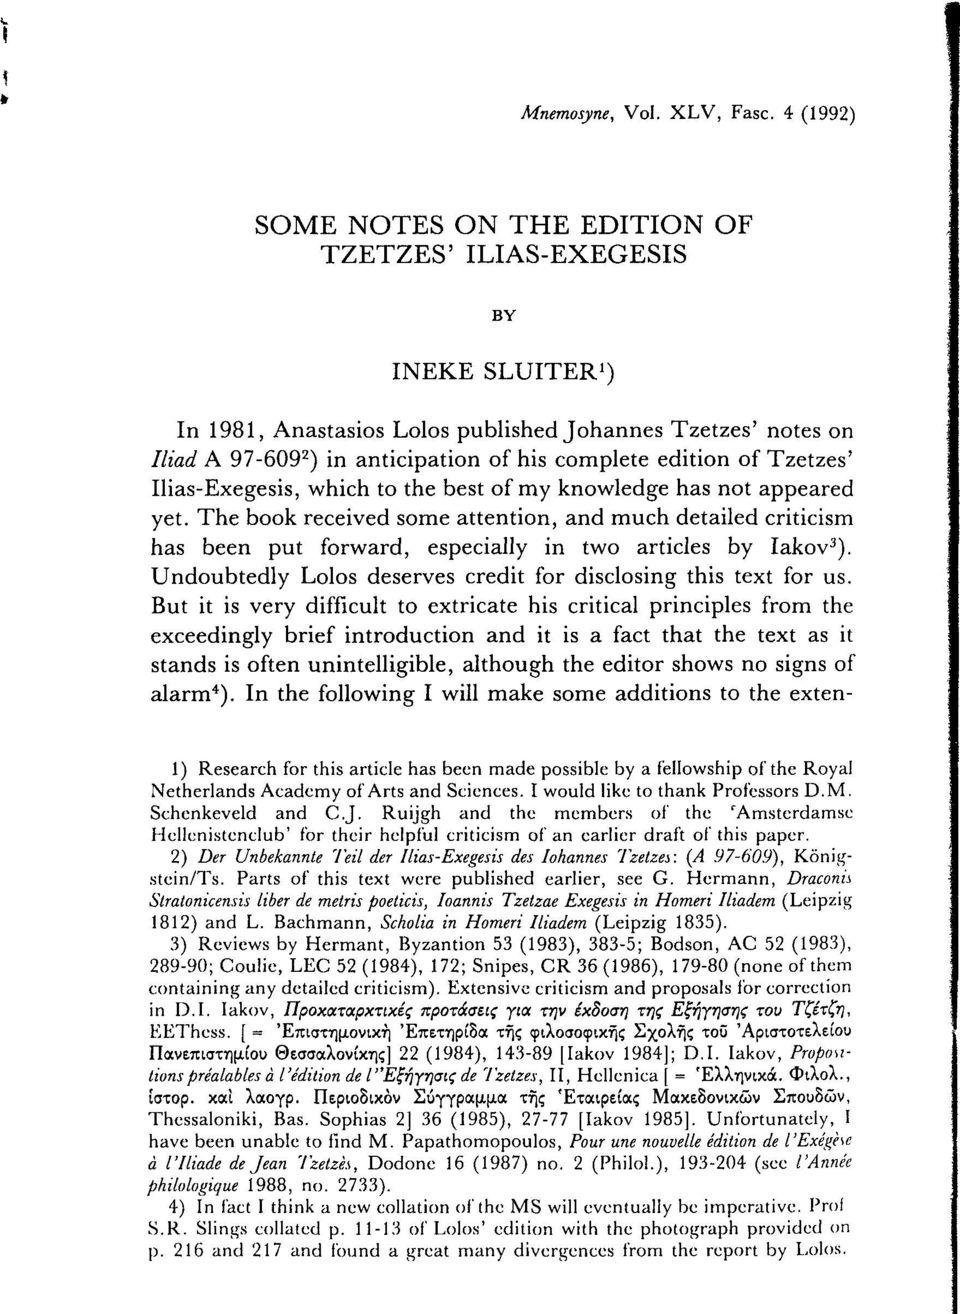 edition of Tzetzes' Ilias-Exegesis, which to the best of my knowledge has not appeared yet.